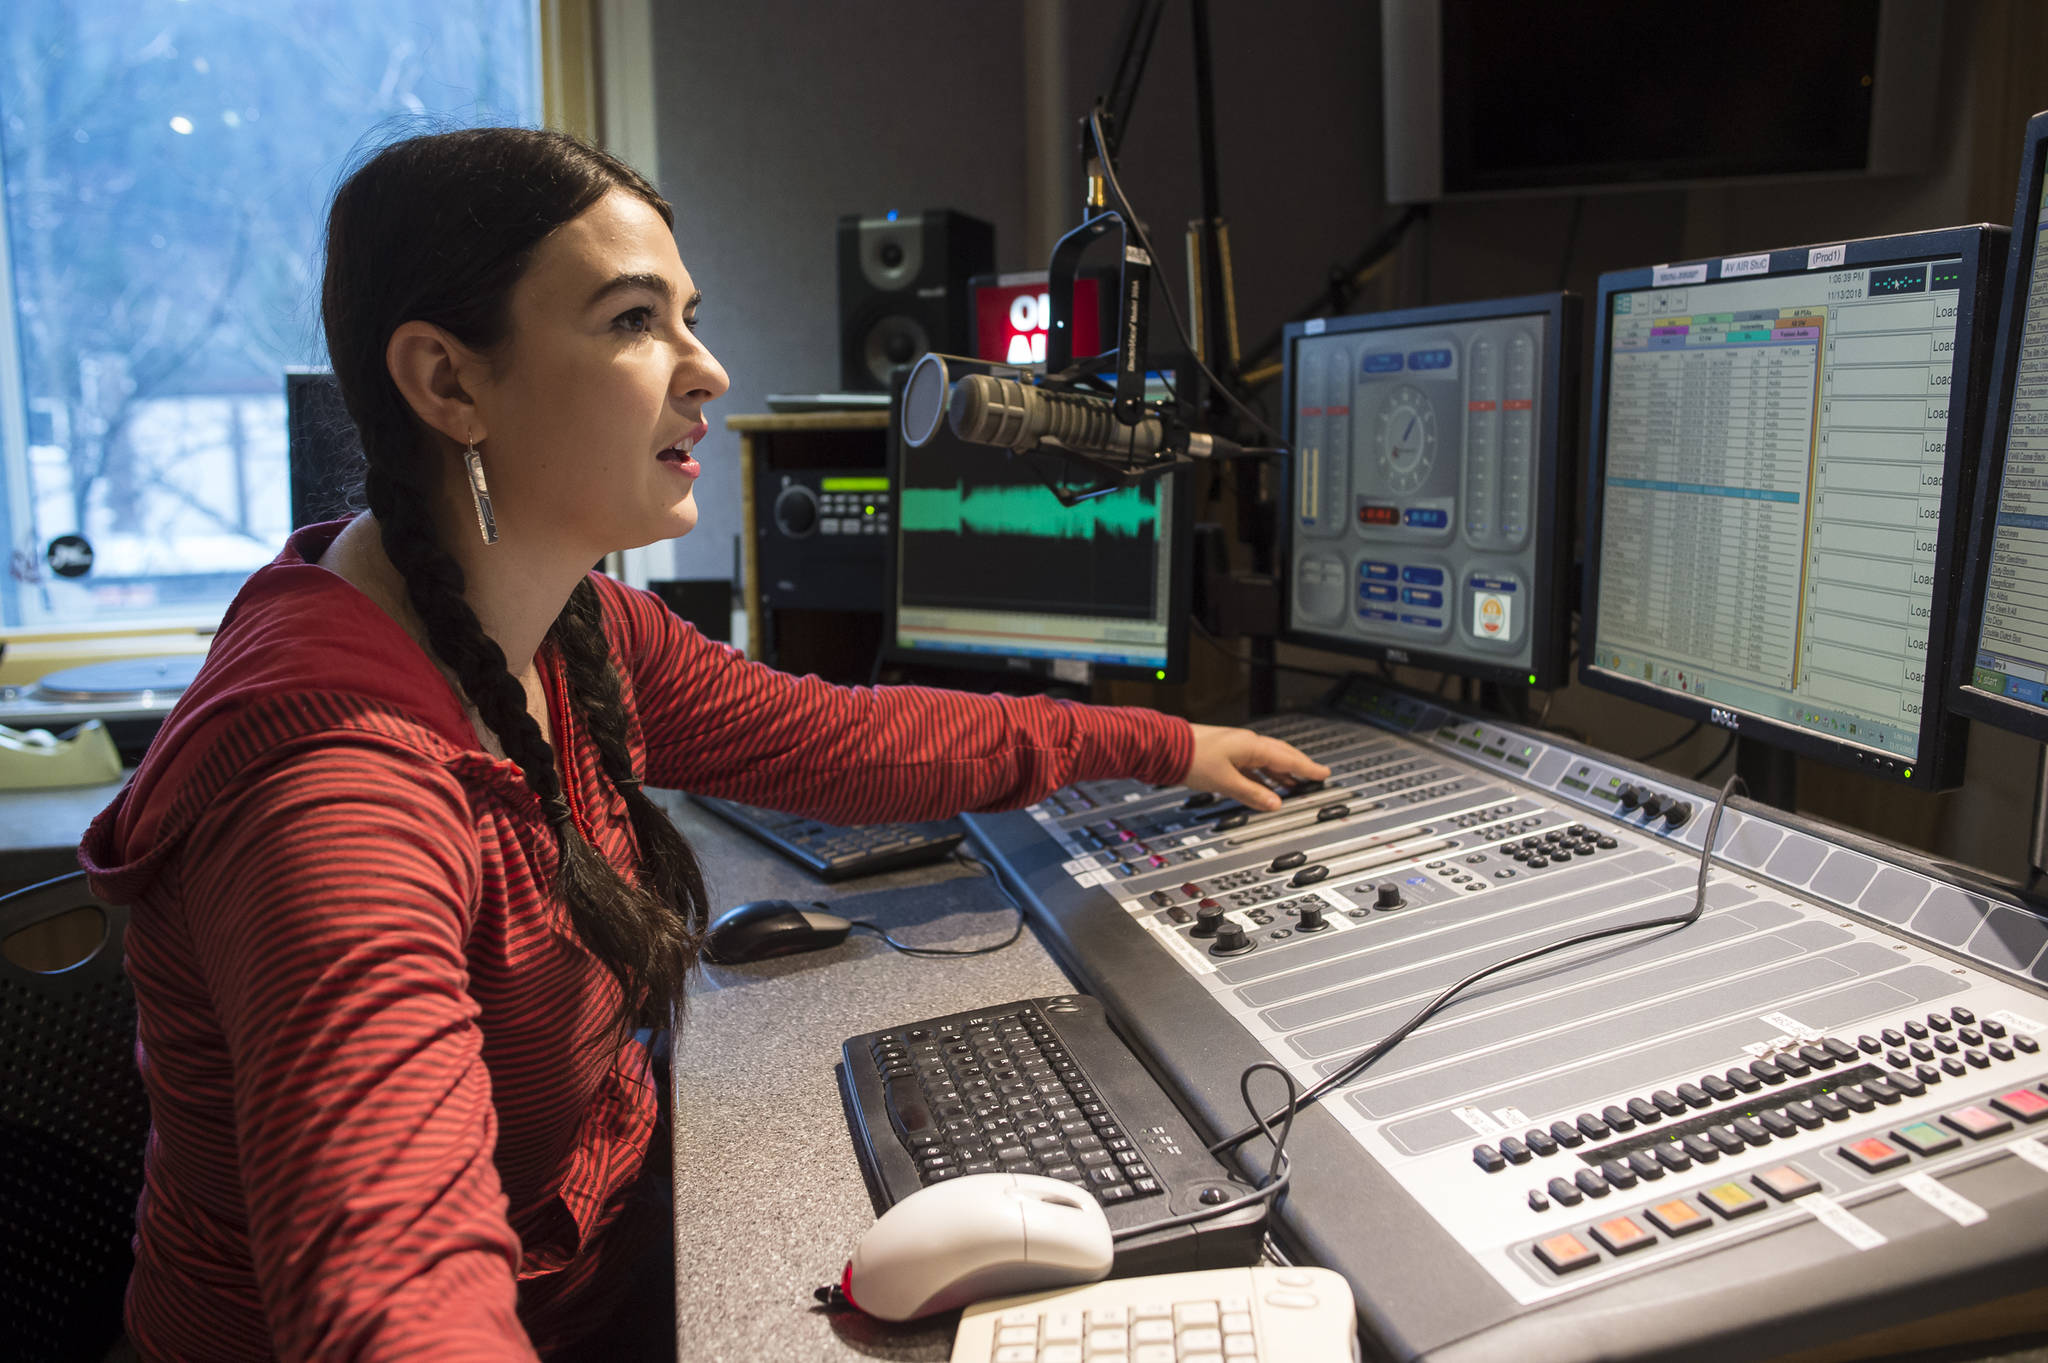 Annie Bartholomew, Program Director and host for KXLL-FM, has helped find five songs from Alaska artists in the first round of nominees intended to replace the state’s existing telephone hold music. (Michael Penn | Juneau Empire)